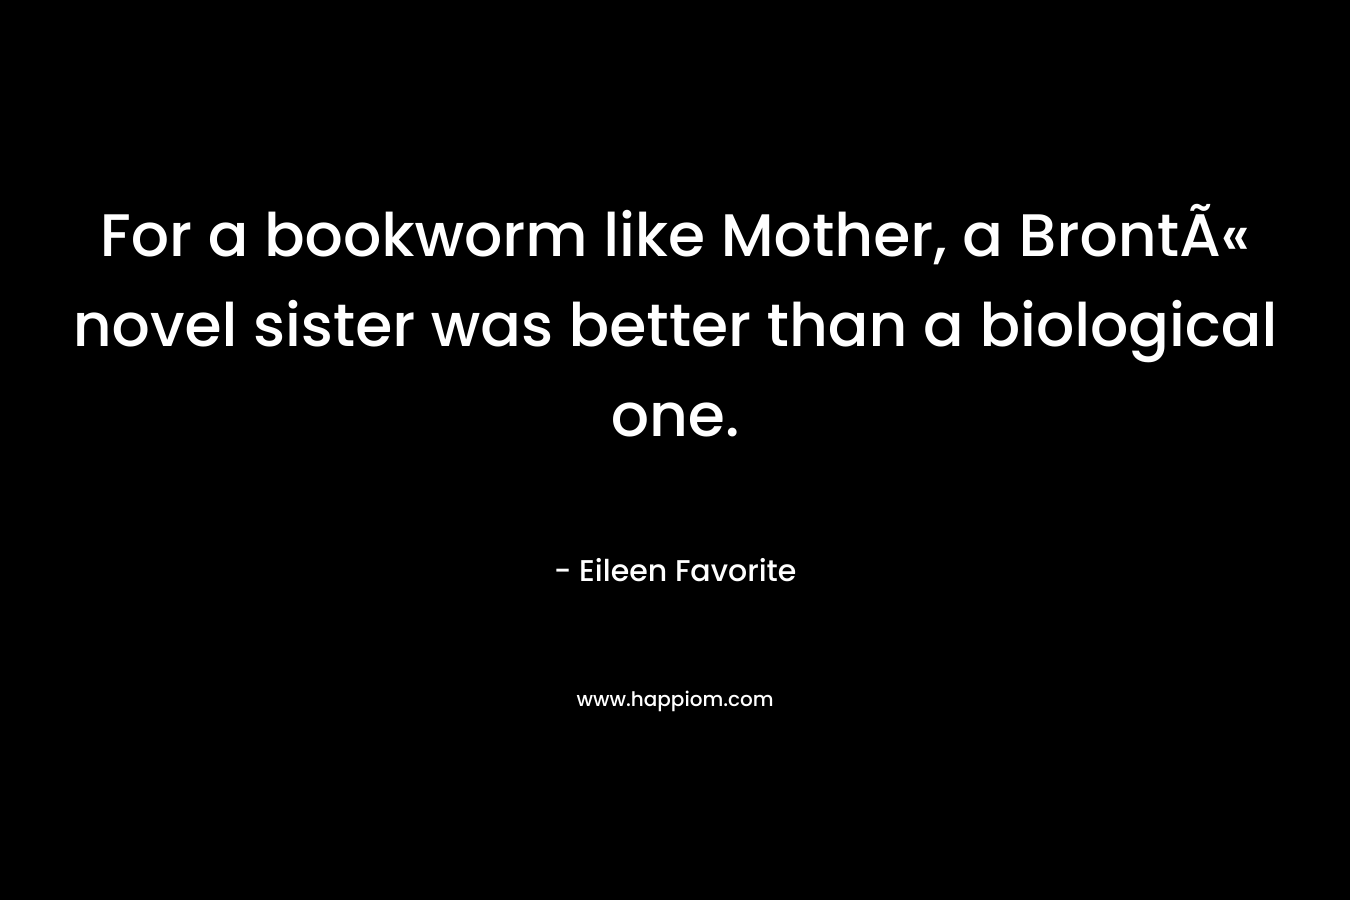 For a bookworm like Mother, a BrontÃ« novel sister was better than a biological one.